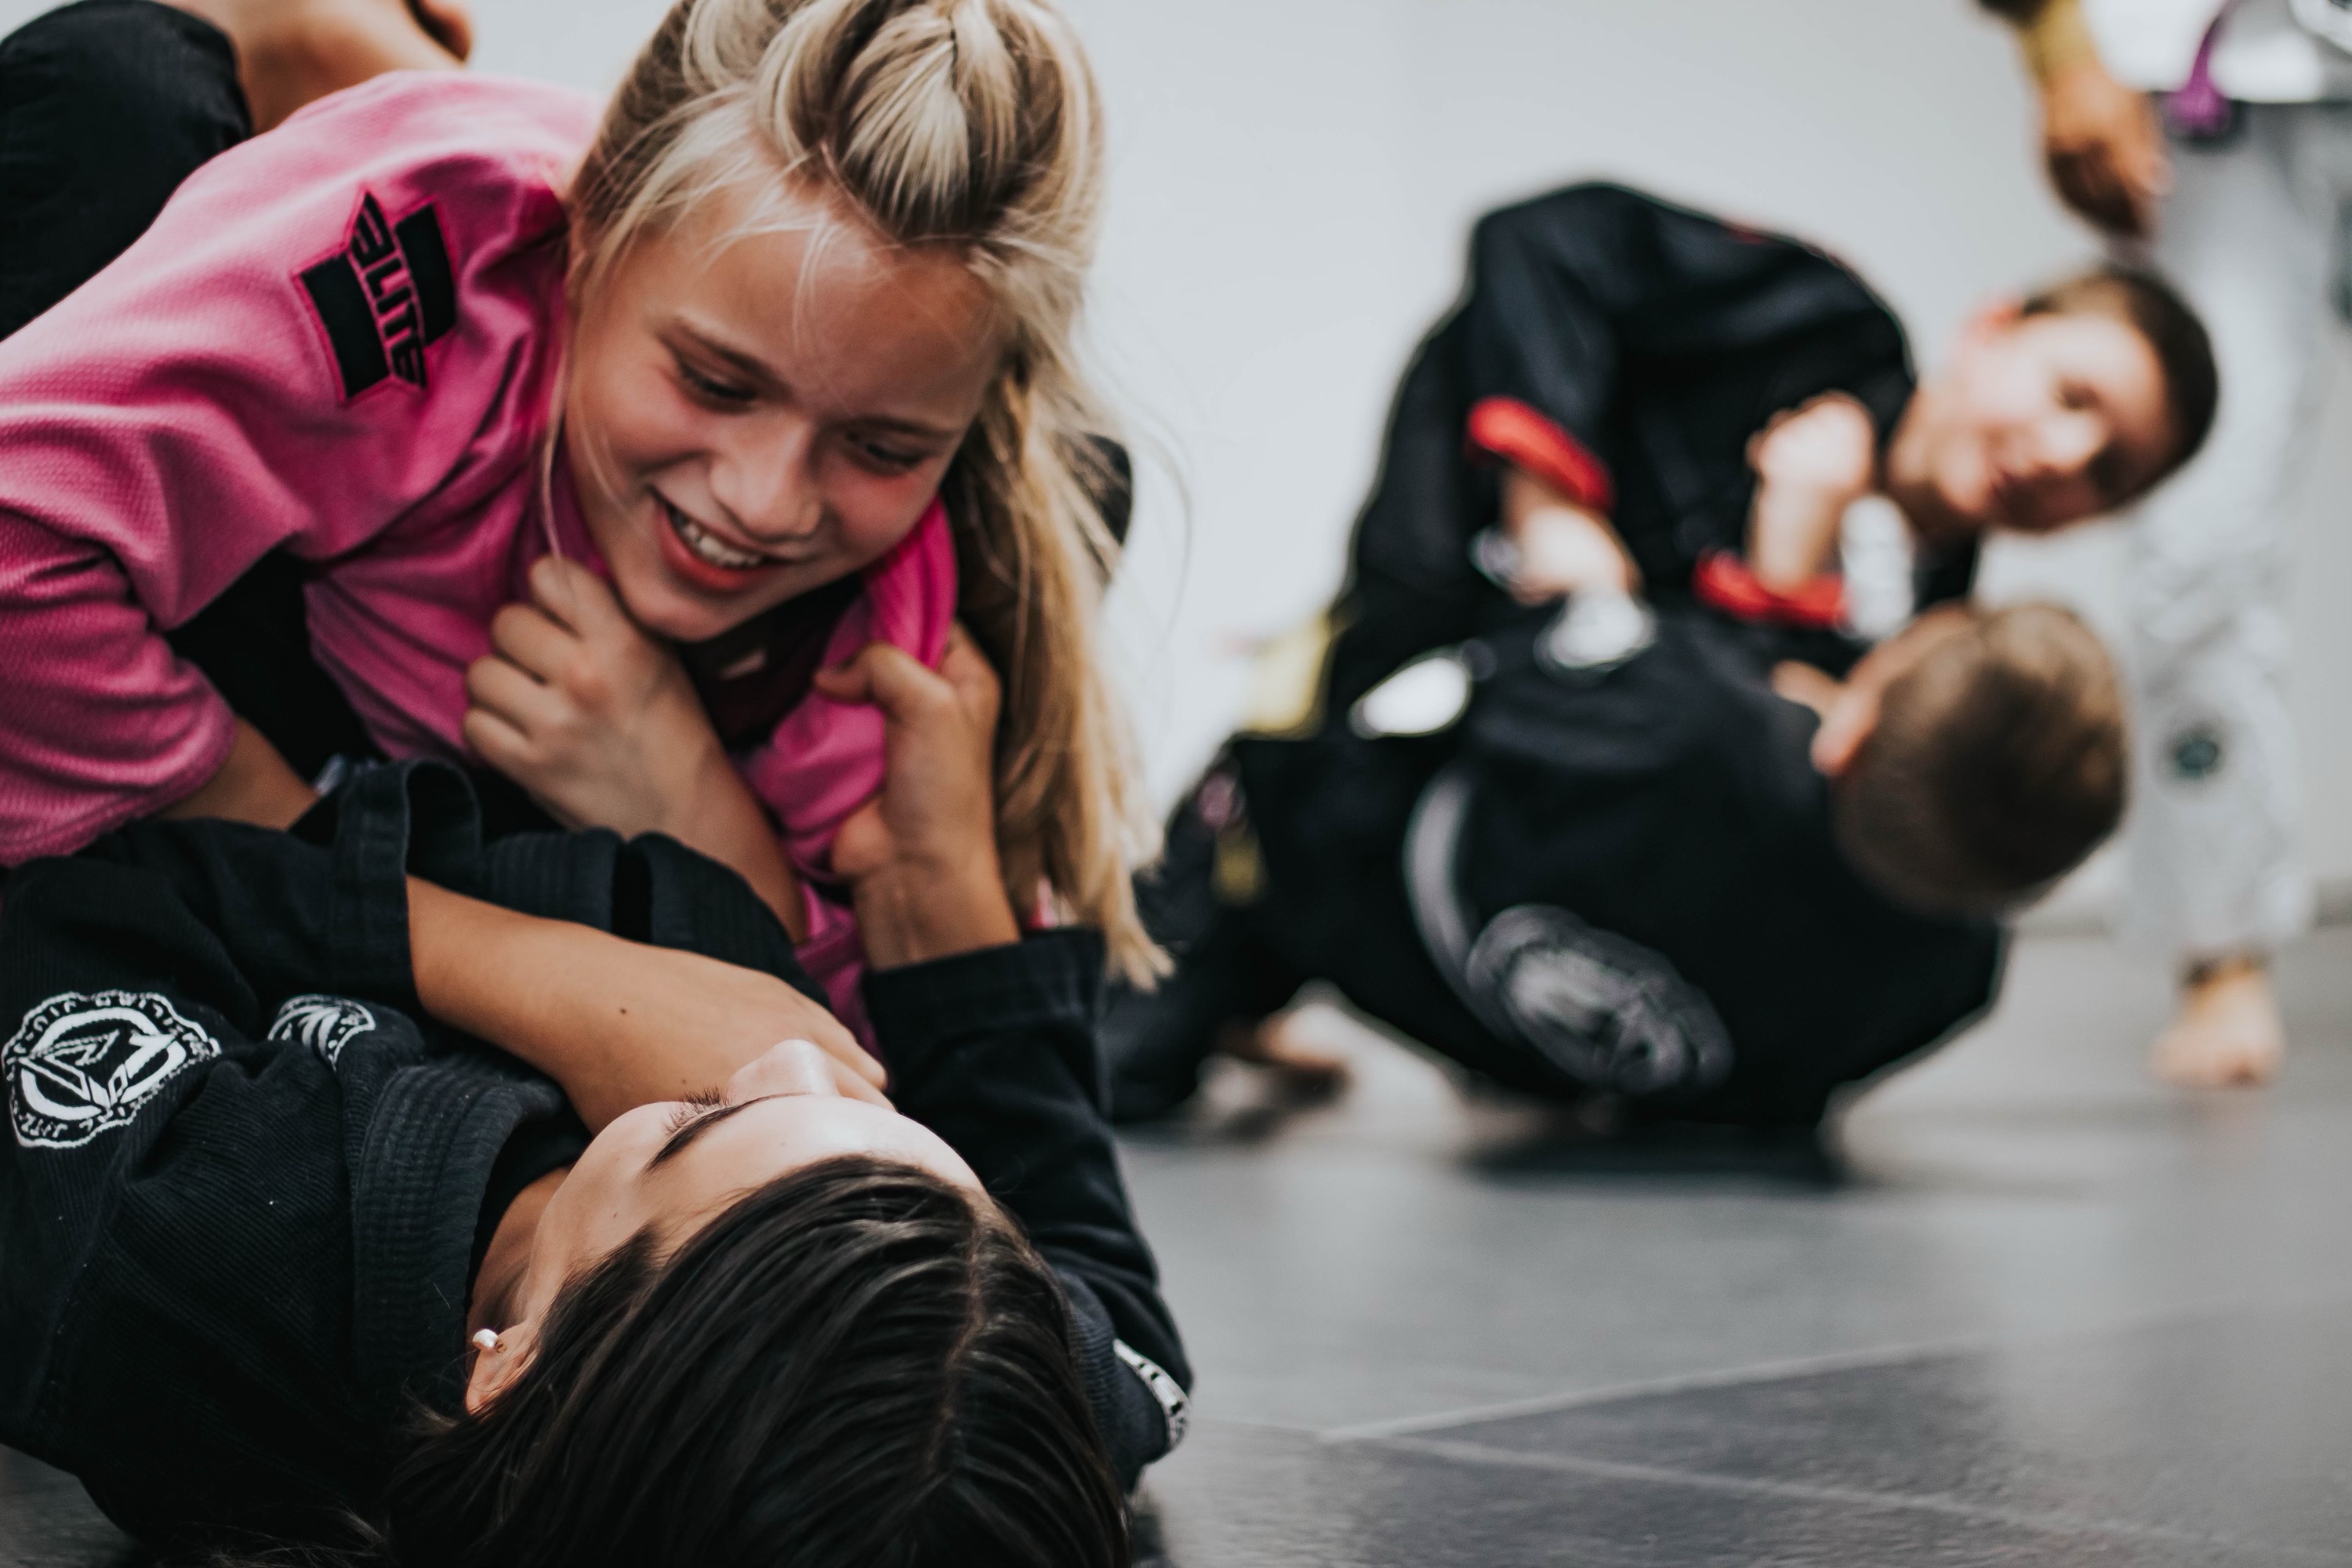 youth students laughing while rolling (training jiu-jitsu a martial art of self-defense and self-offense)